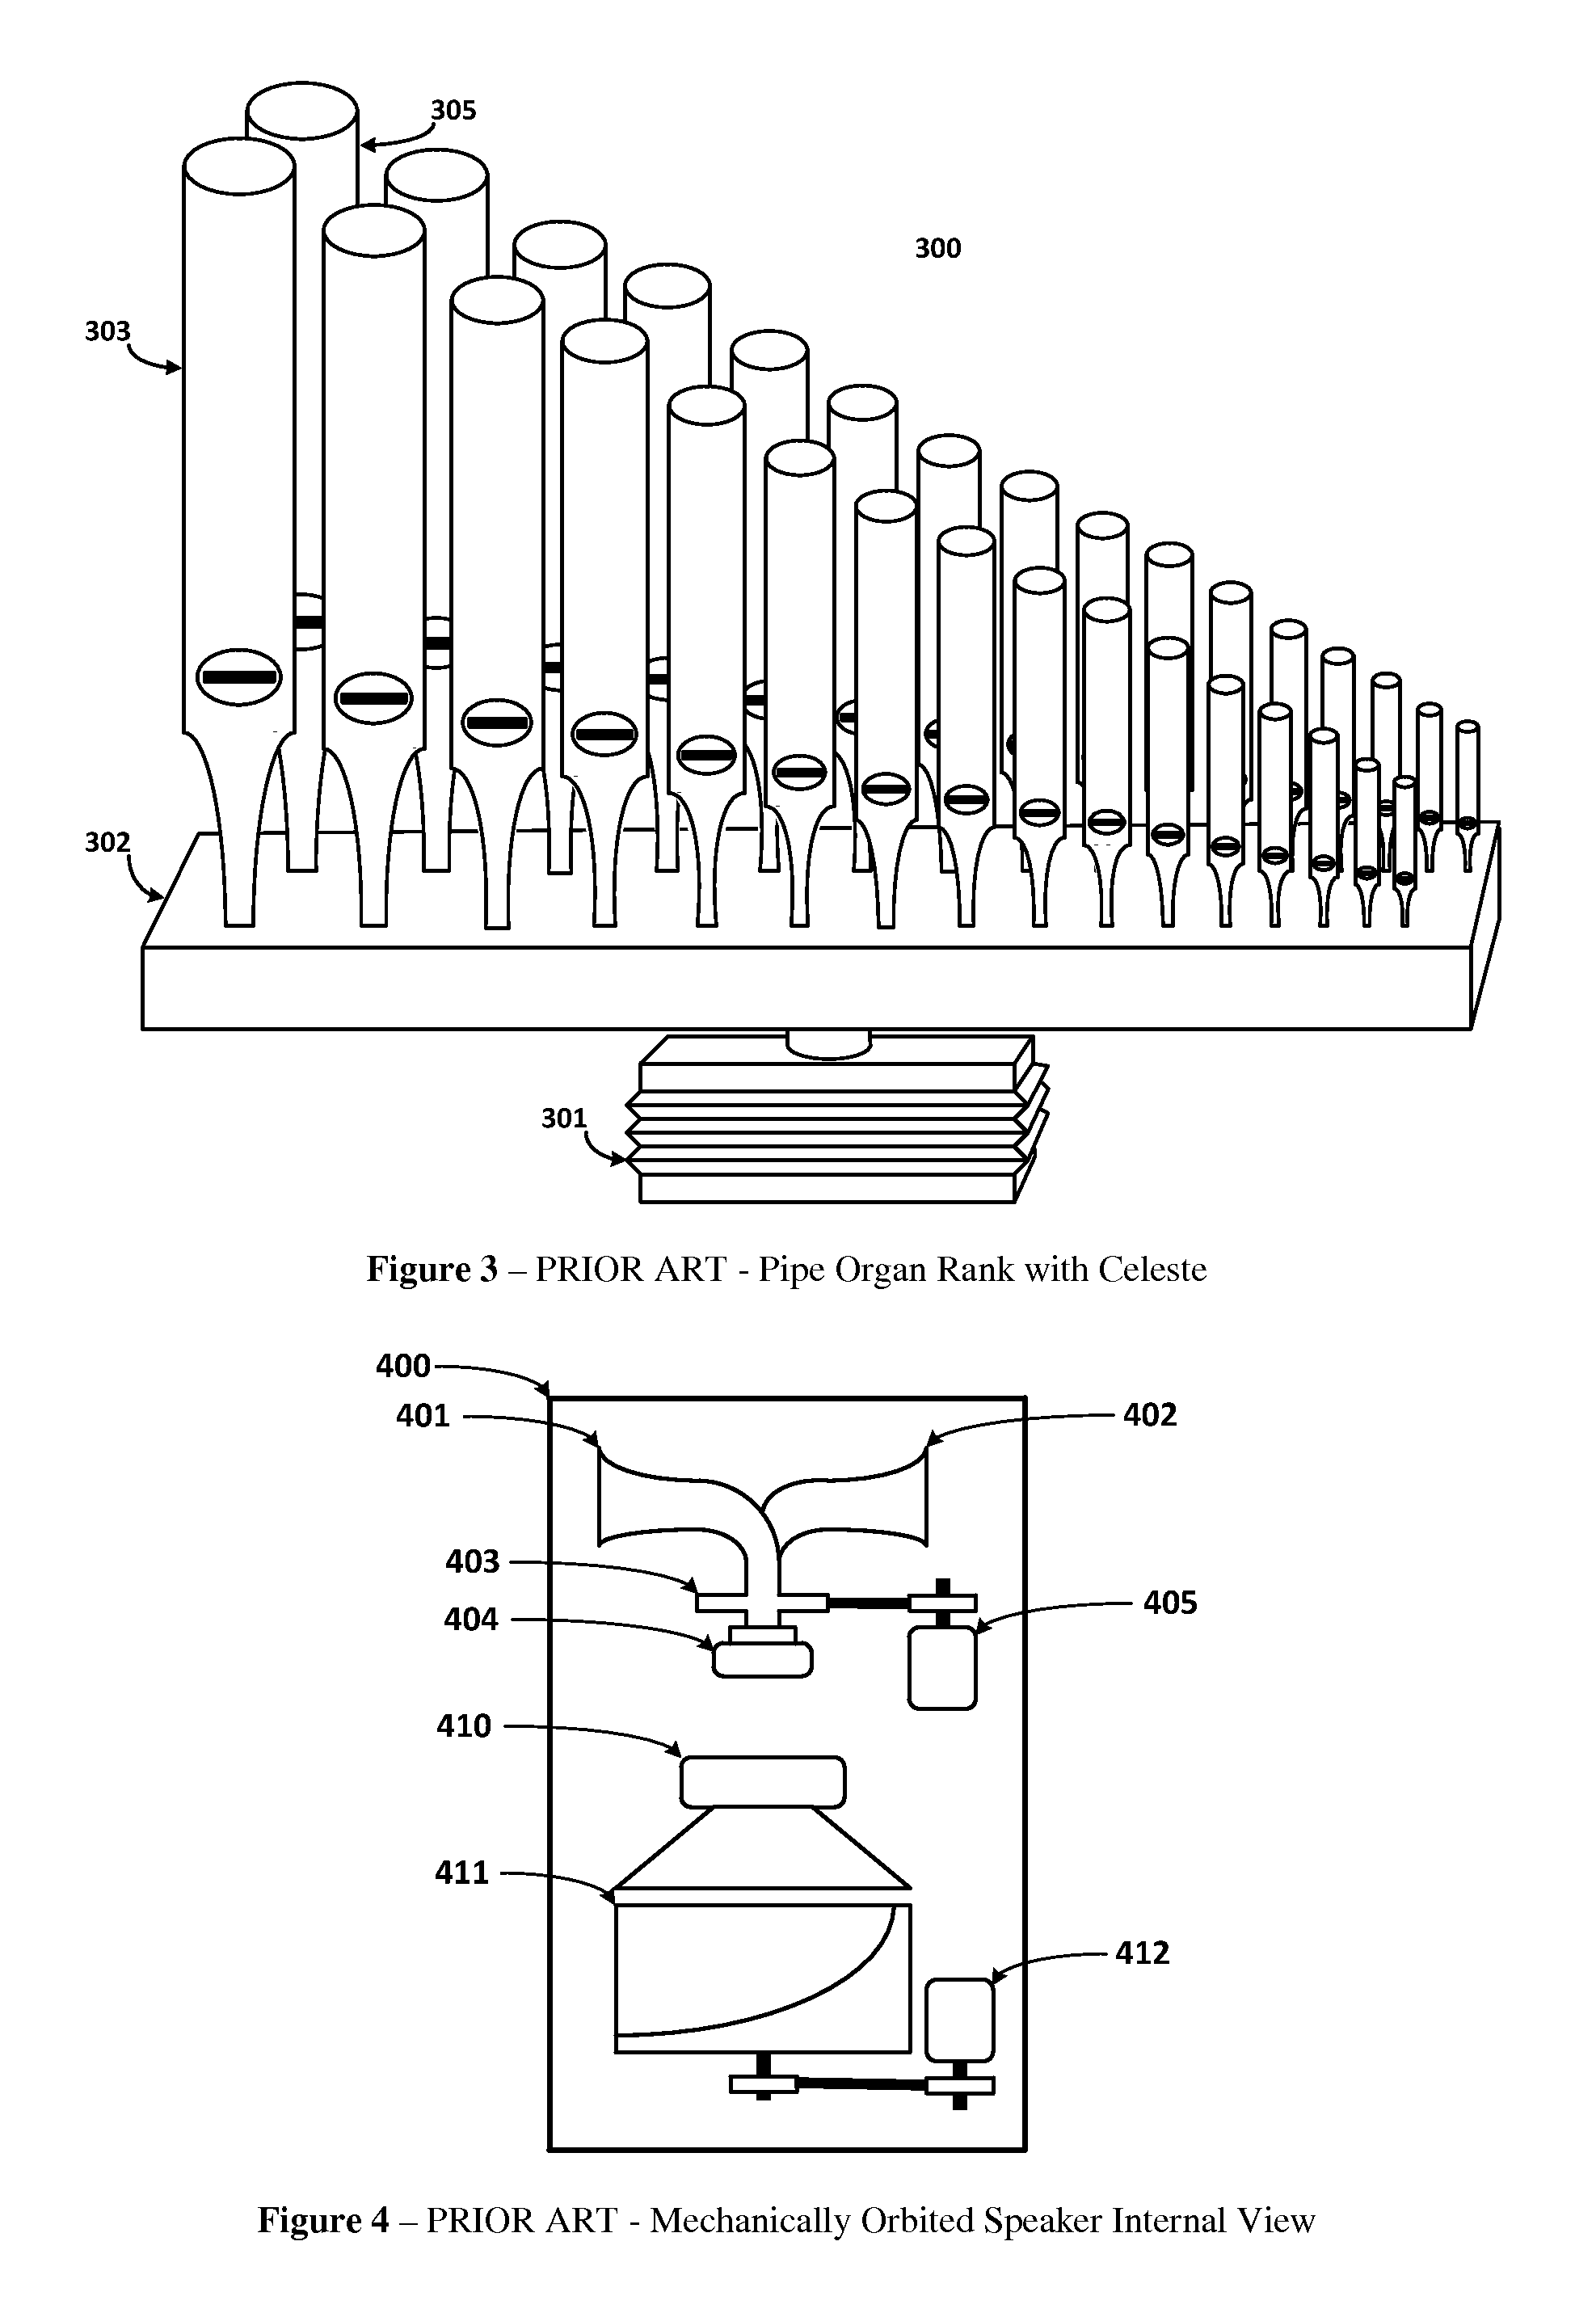 Apparatus and method for a celeste in an electronically-orbited speaker